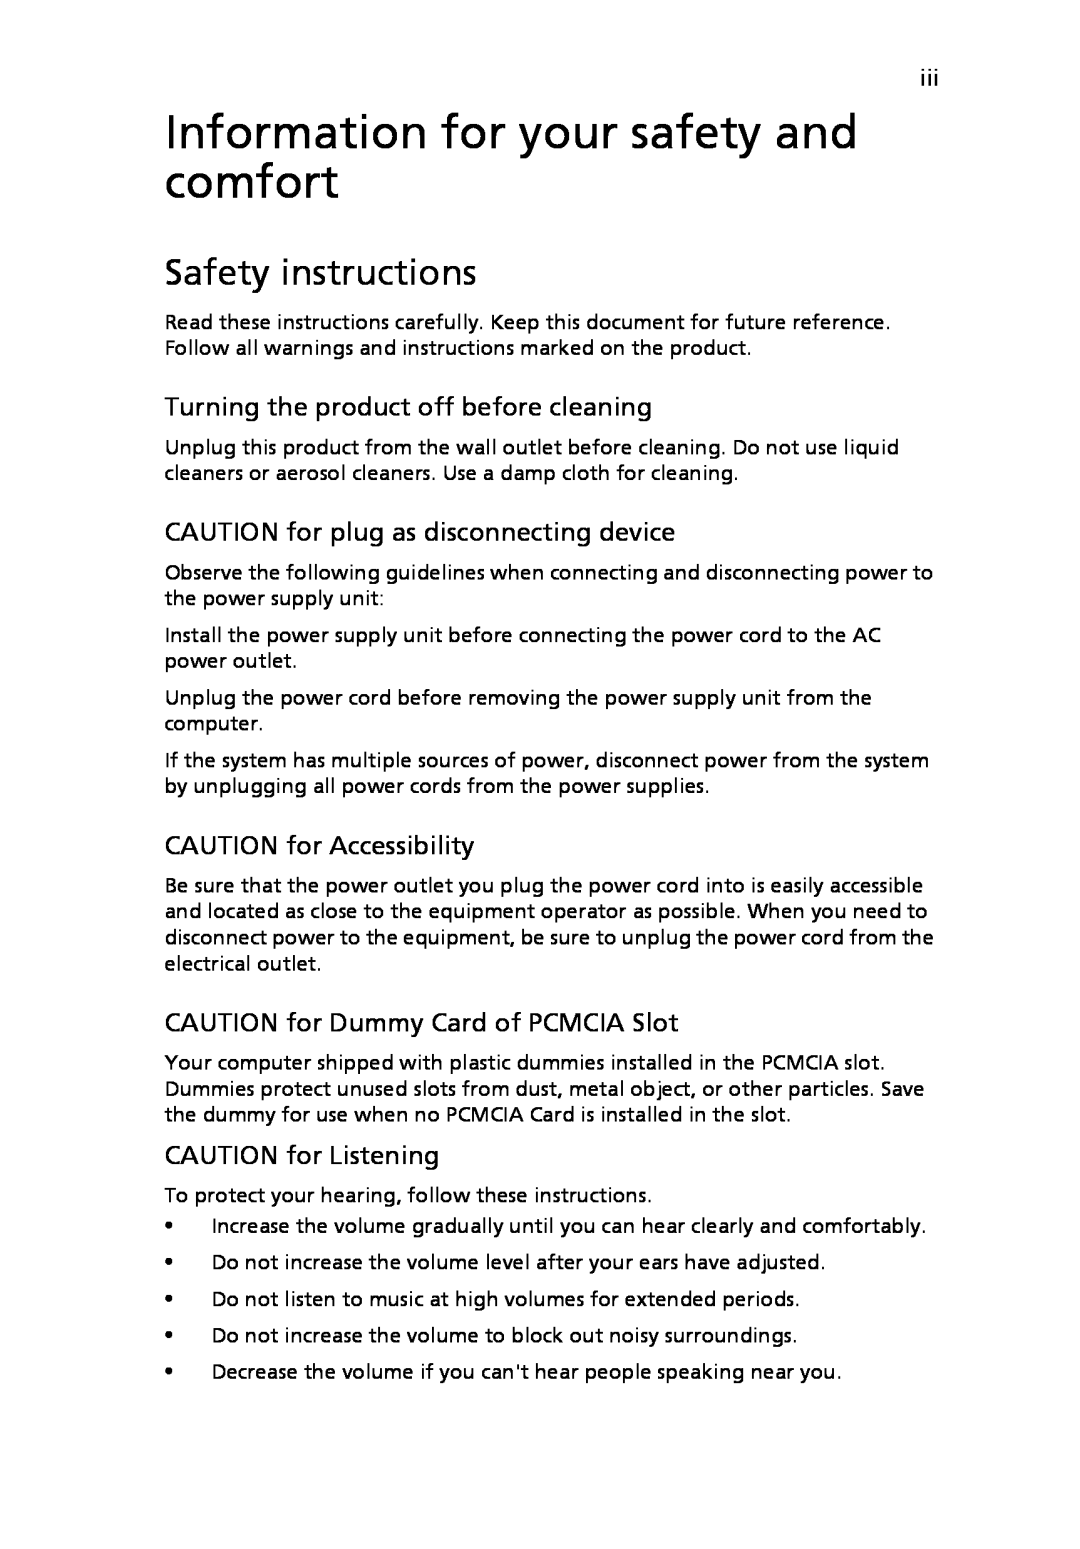 Acer LE1 manual Information for your safety and comfort, Safety instructions, Turning the product off before cleaning 